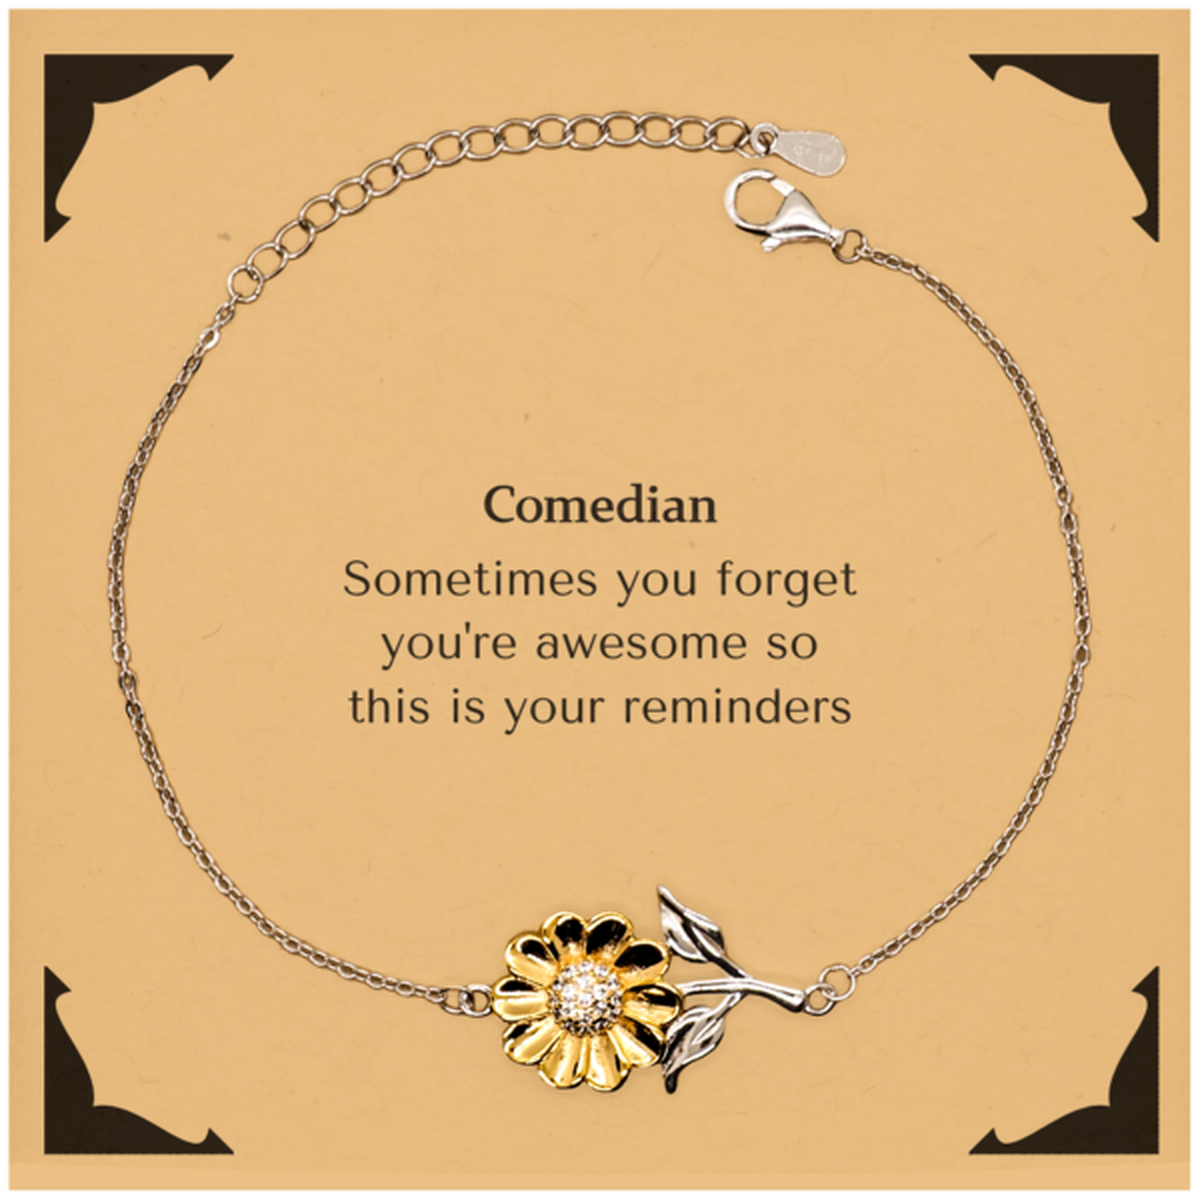 Sentimental Comedian Sunflower Bracelet, Comedian Sometimes you forget you're awesome so this is your reminders, Graduation Christmas Birthday Gifts for Comedian, Men, Women, Coworkers